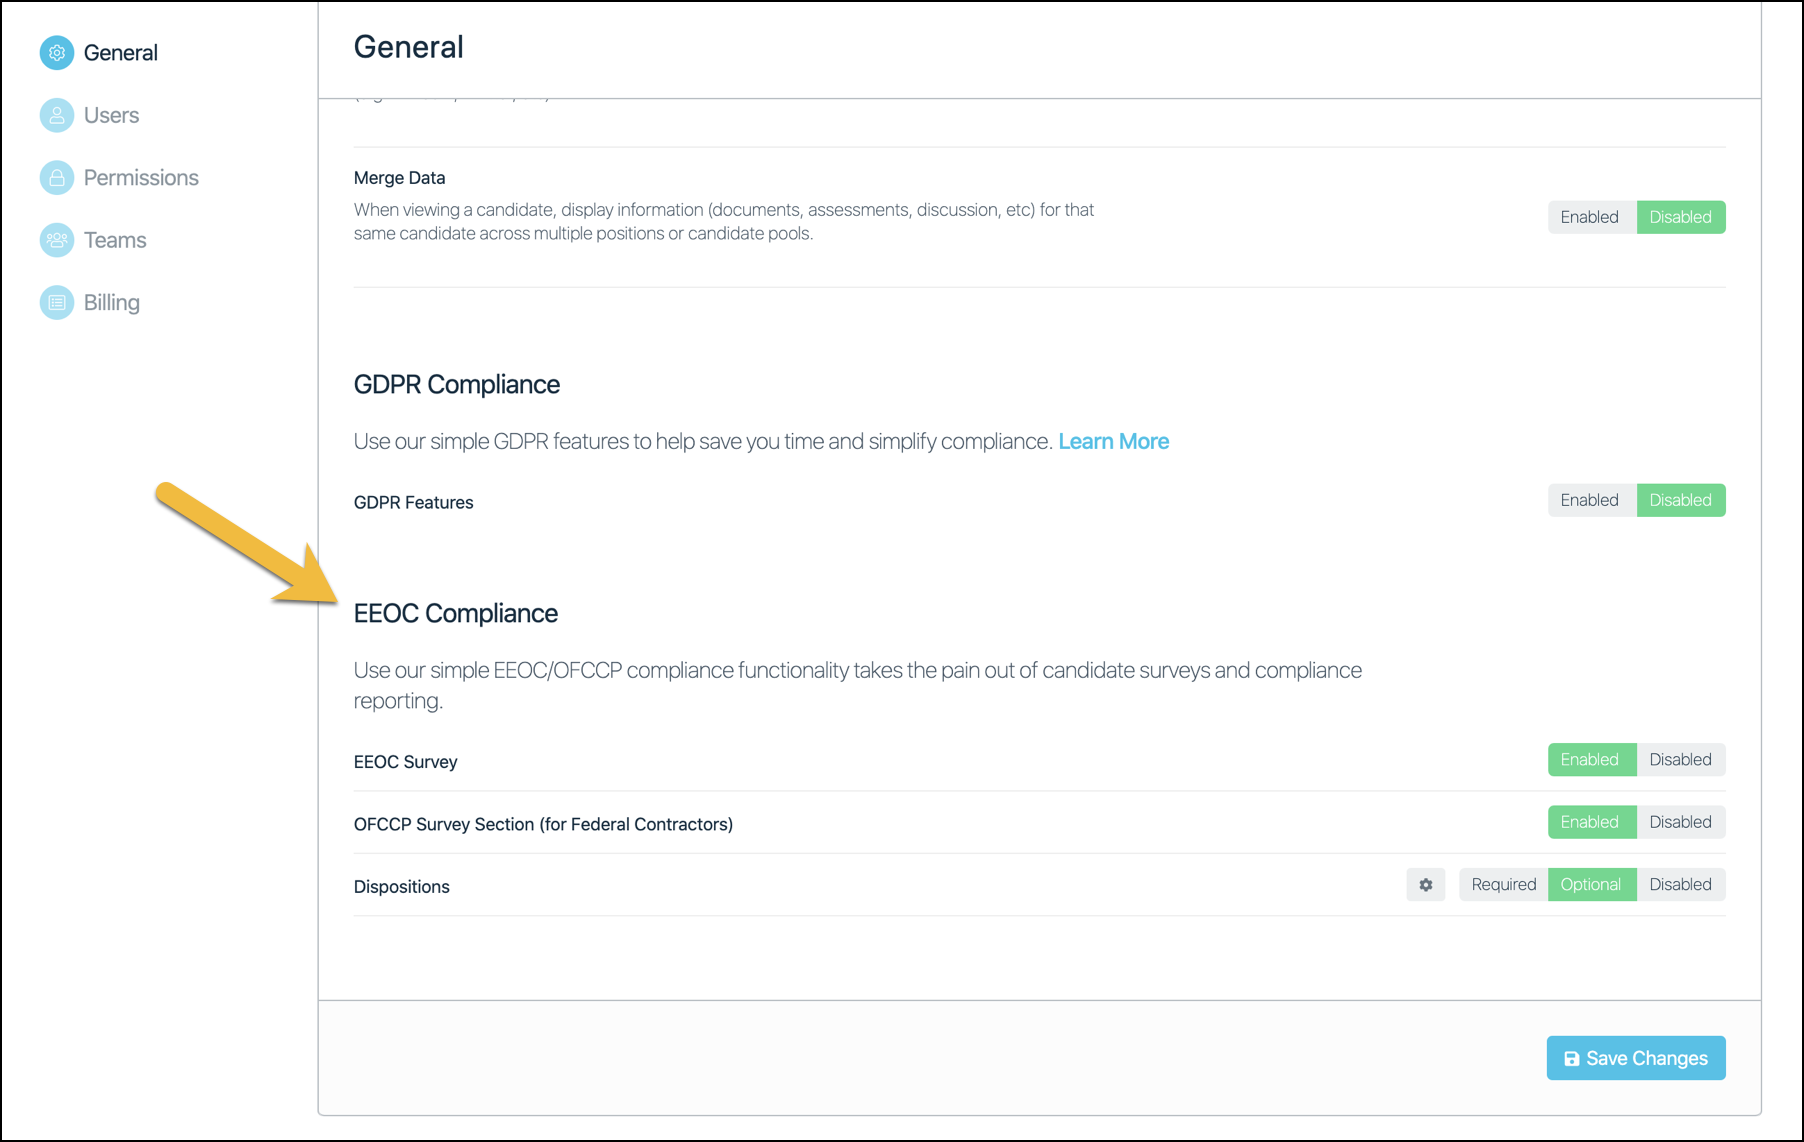 Enabling compliance features in Company Settings